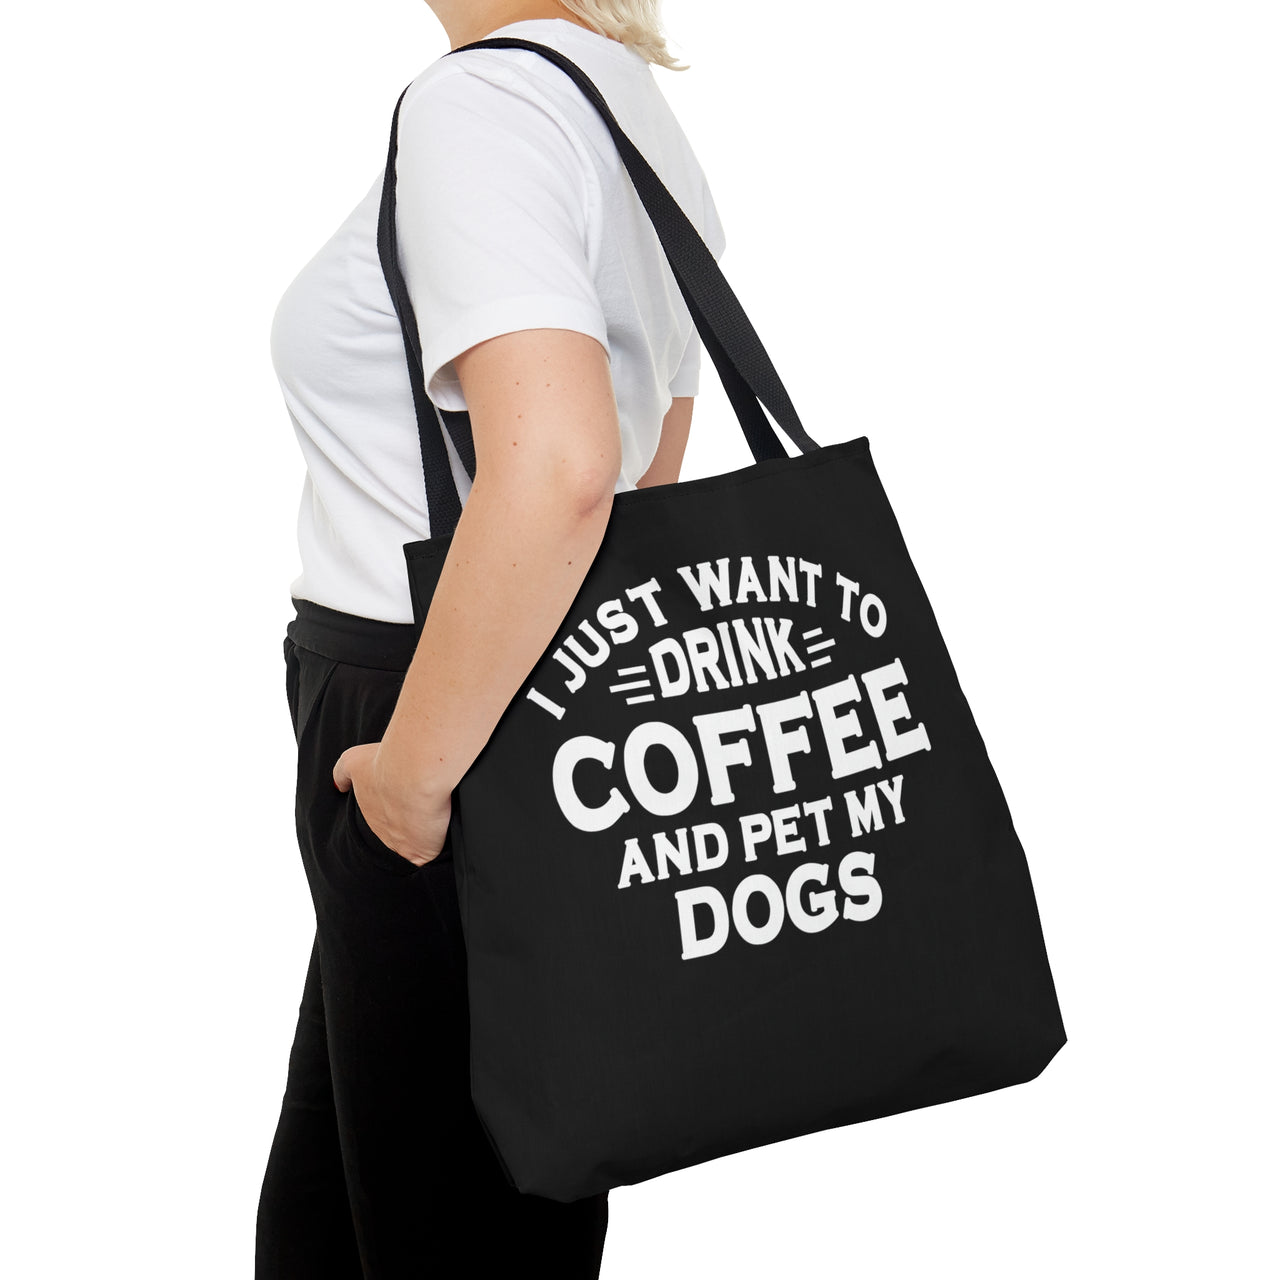 I Just Want To Drink Coffee And Pet My Dogs 🐶🐶 Black Tote Bag